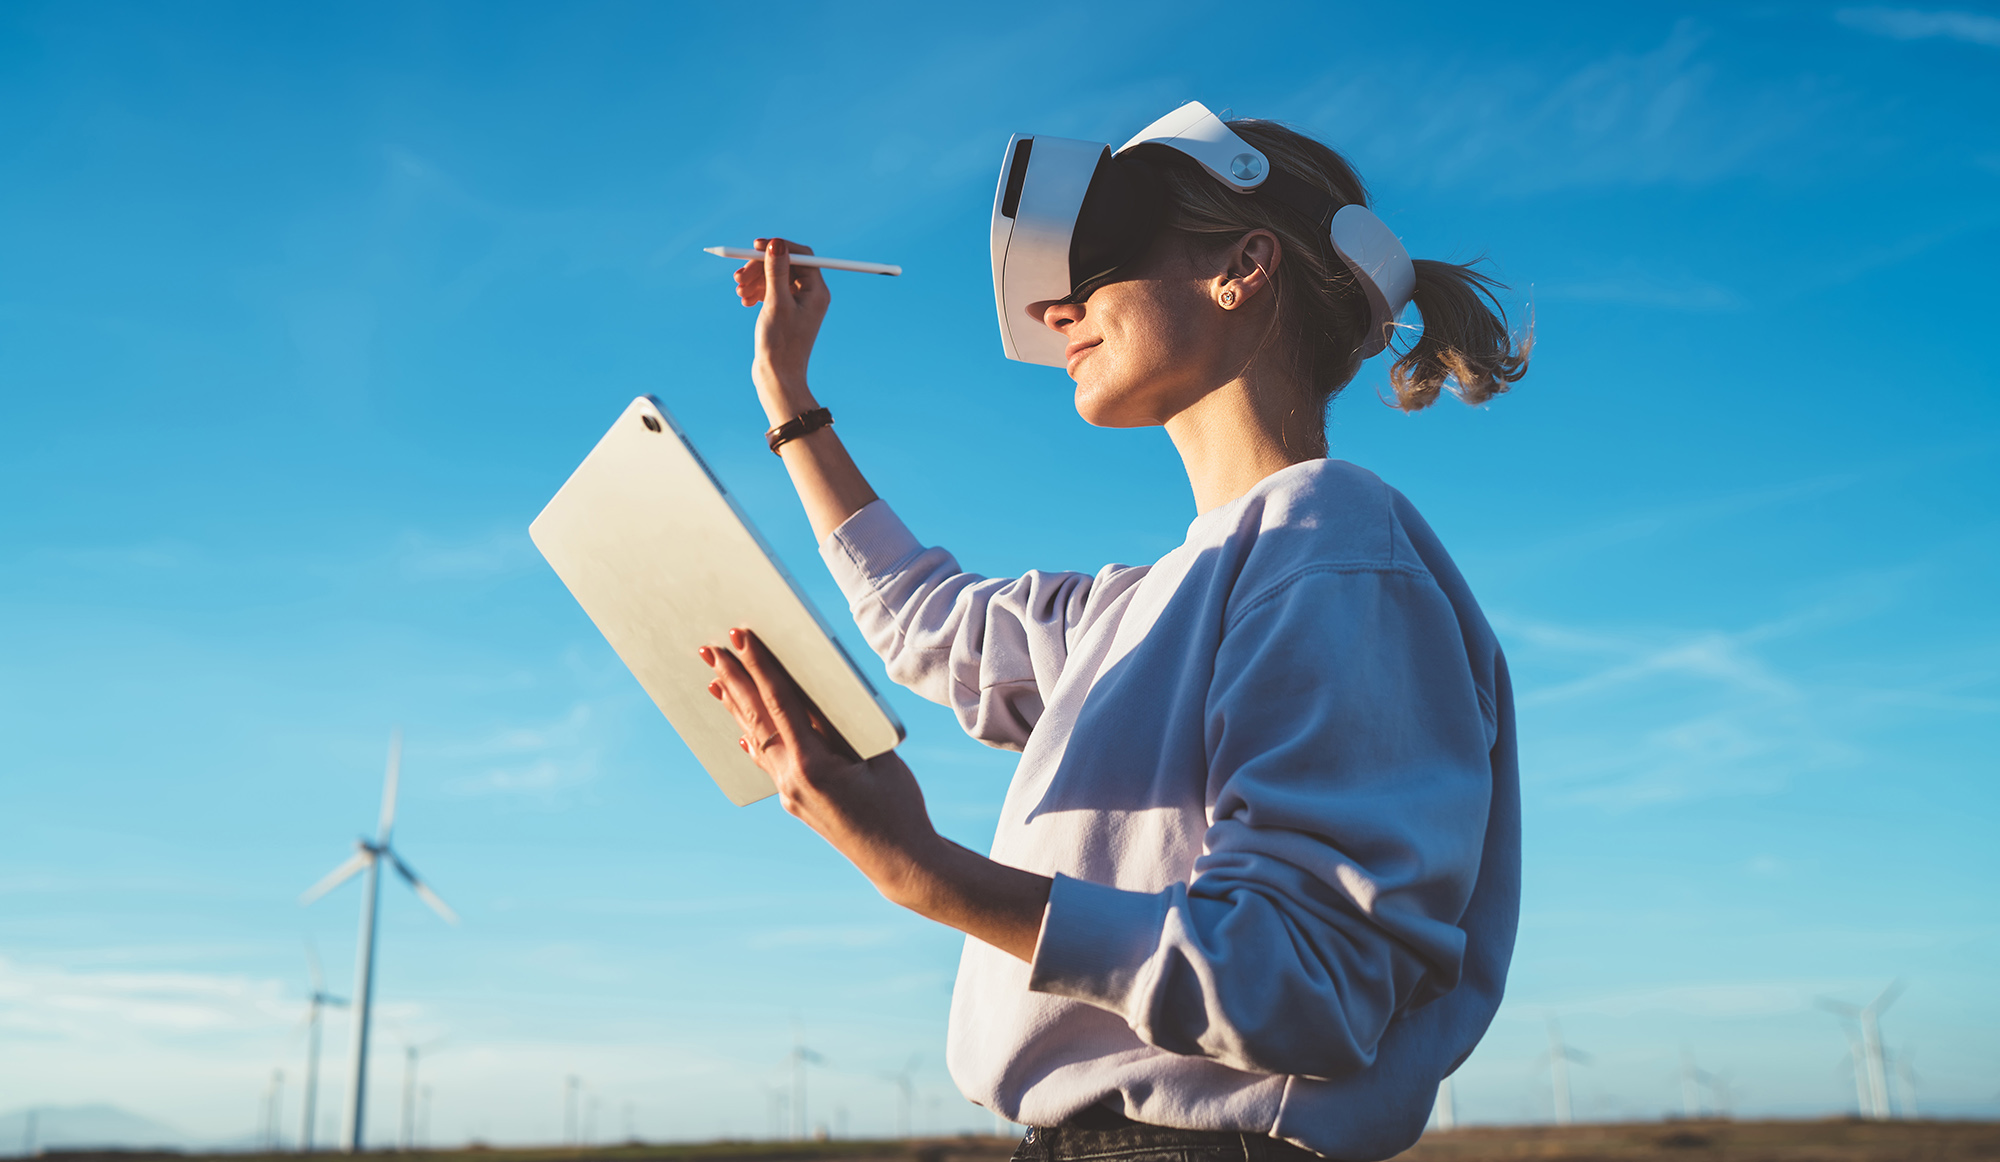 Blonde female in VR goggles making digital virtual reality space with touchpad program and stylus opposite sunlight on blue sky background with windmills